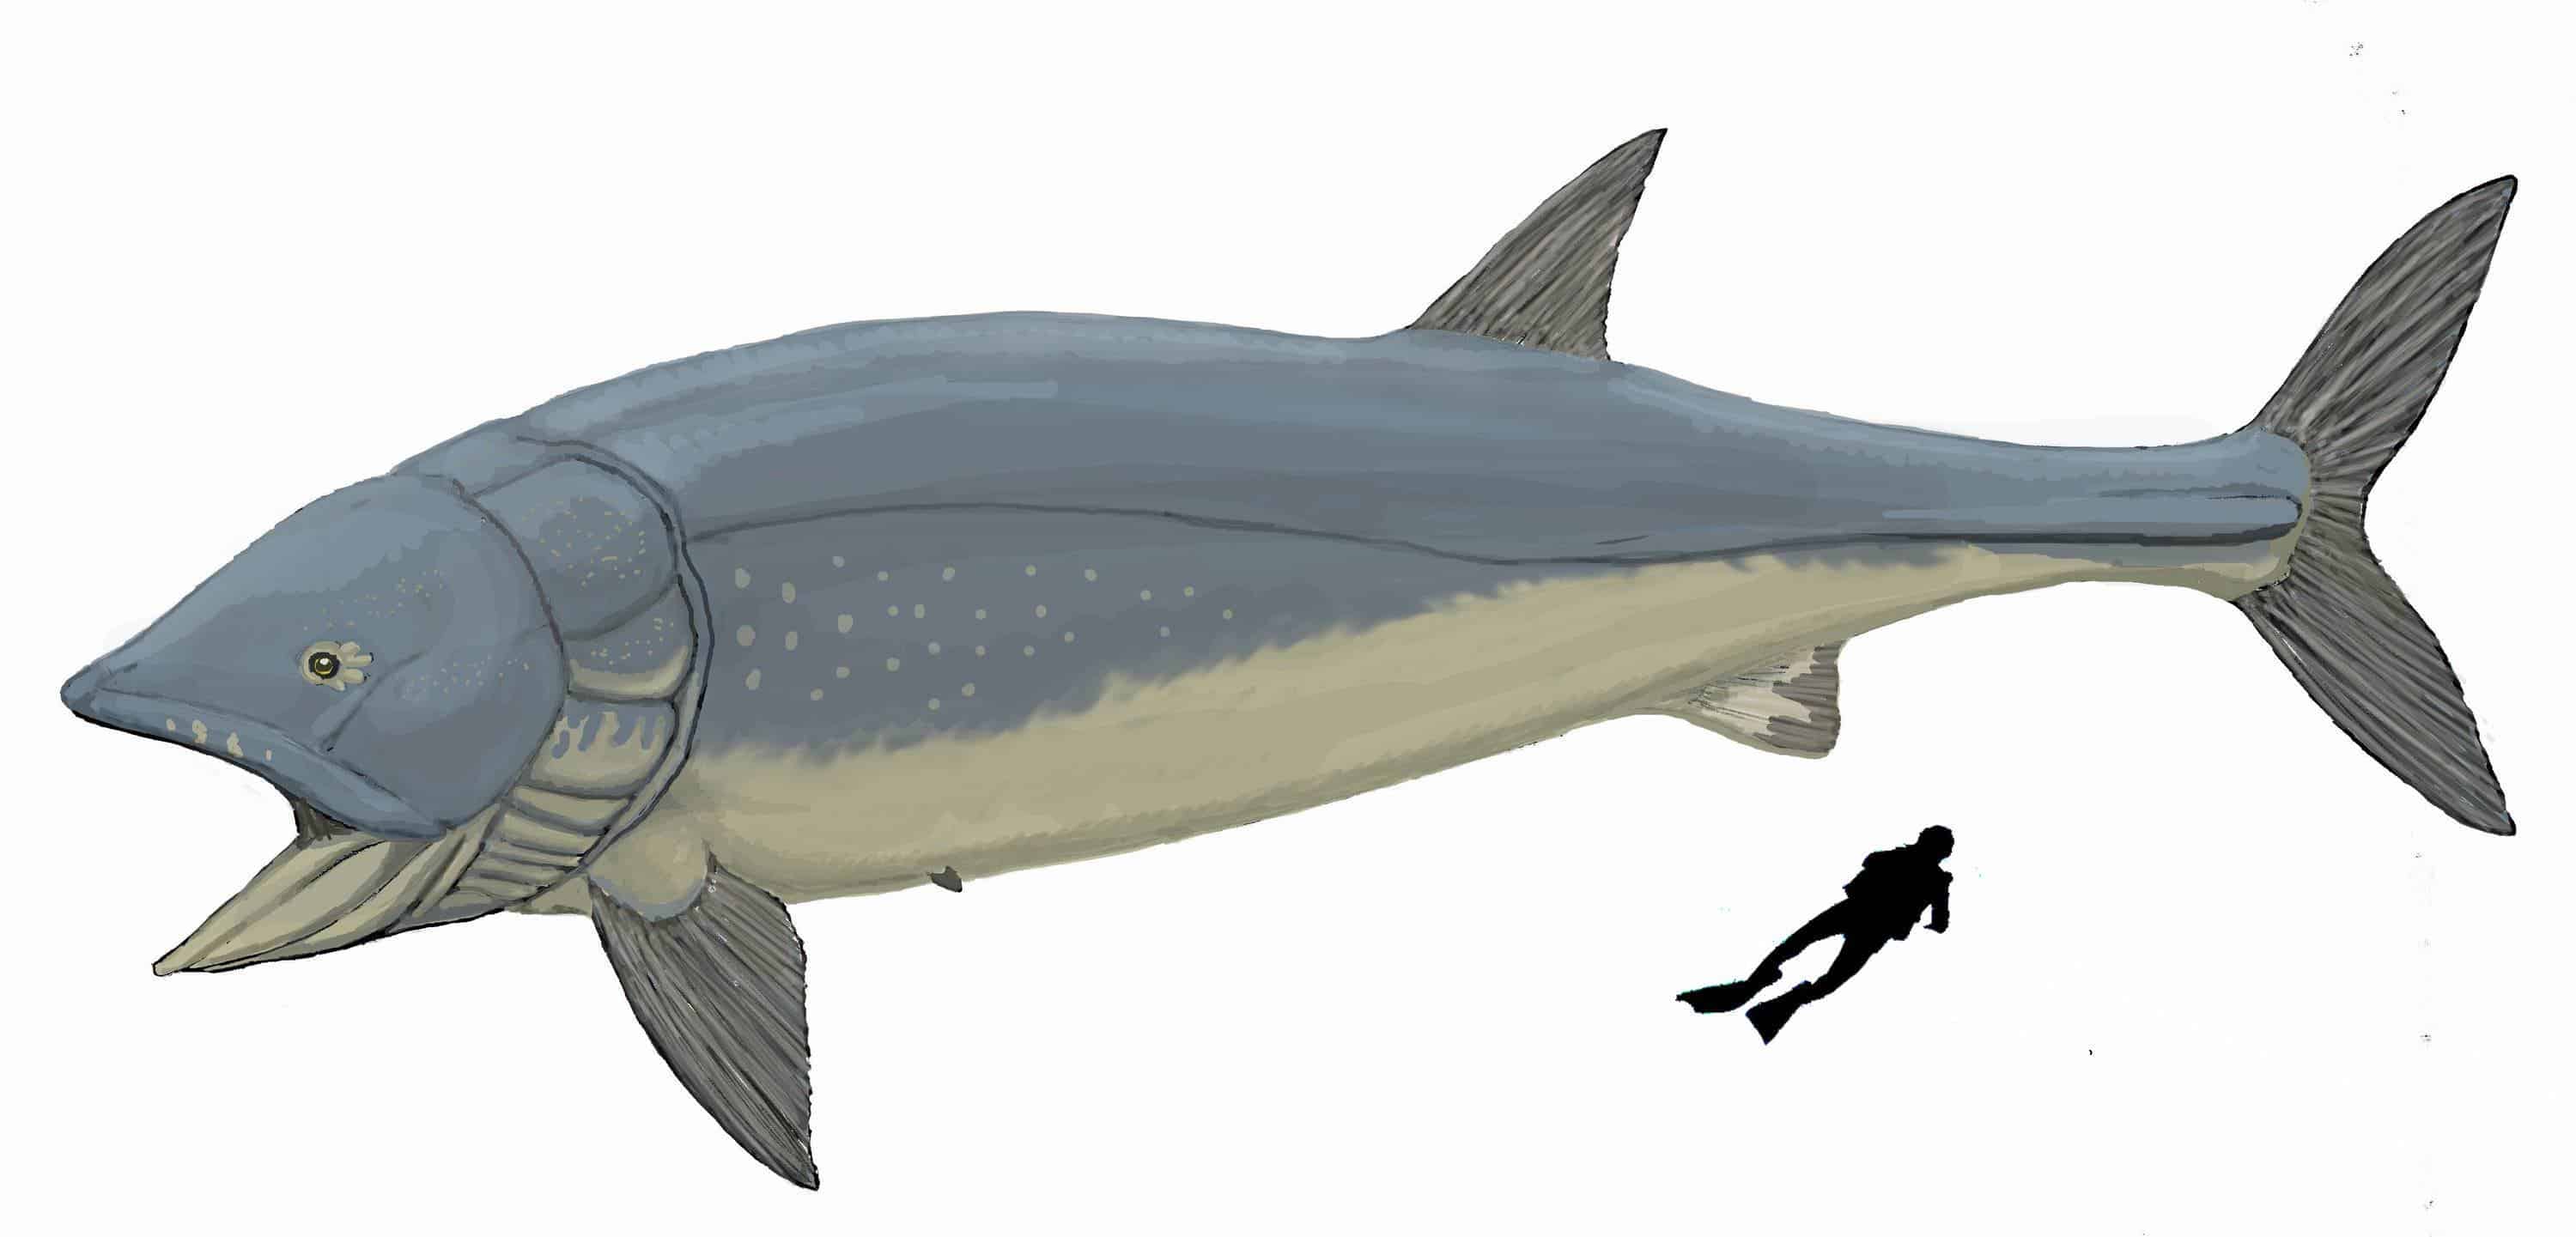 Illustration of giant Jurassic fish Leedsichthys next to human diver for scale. Credit: Wikimedia Commons.